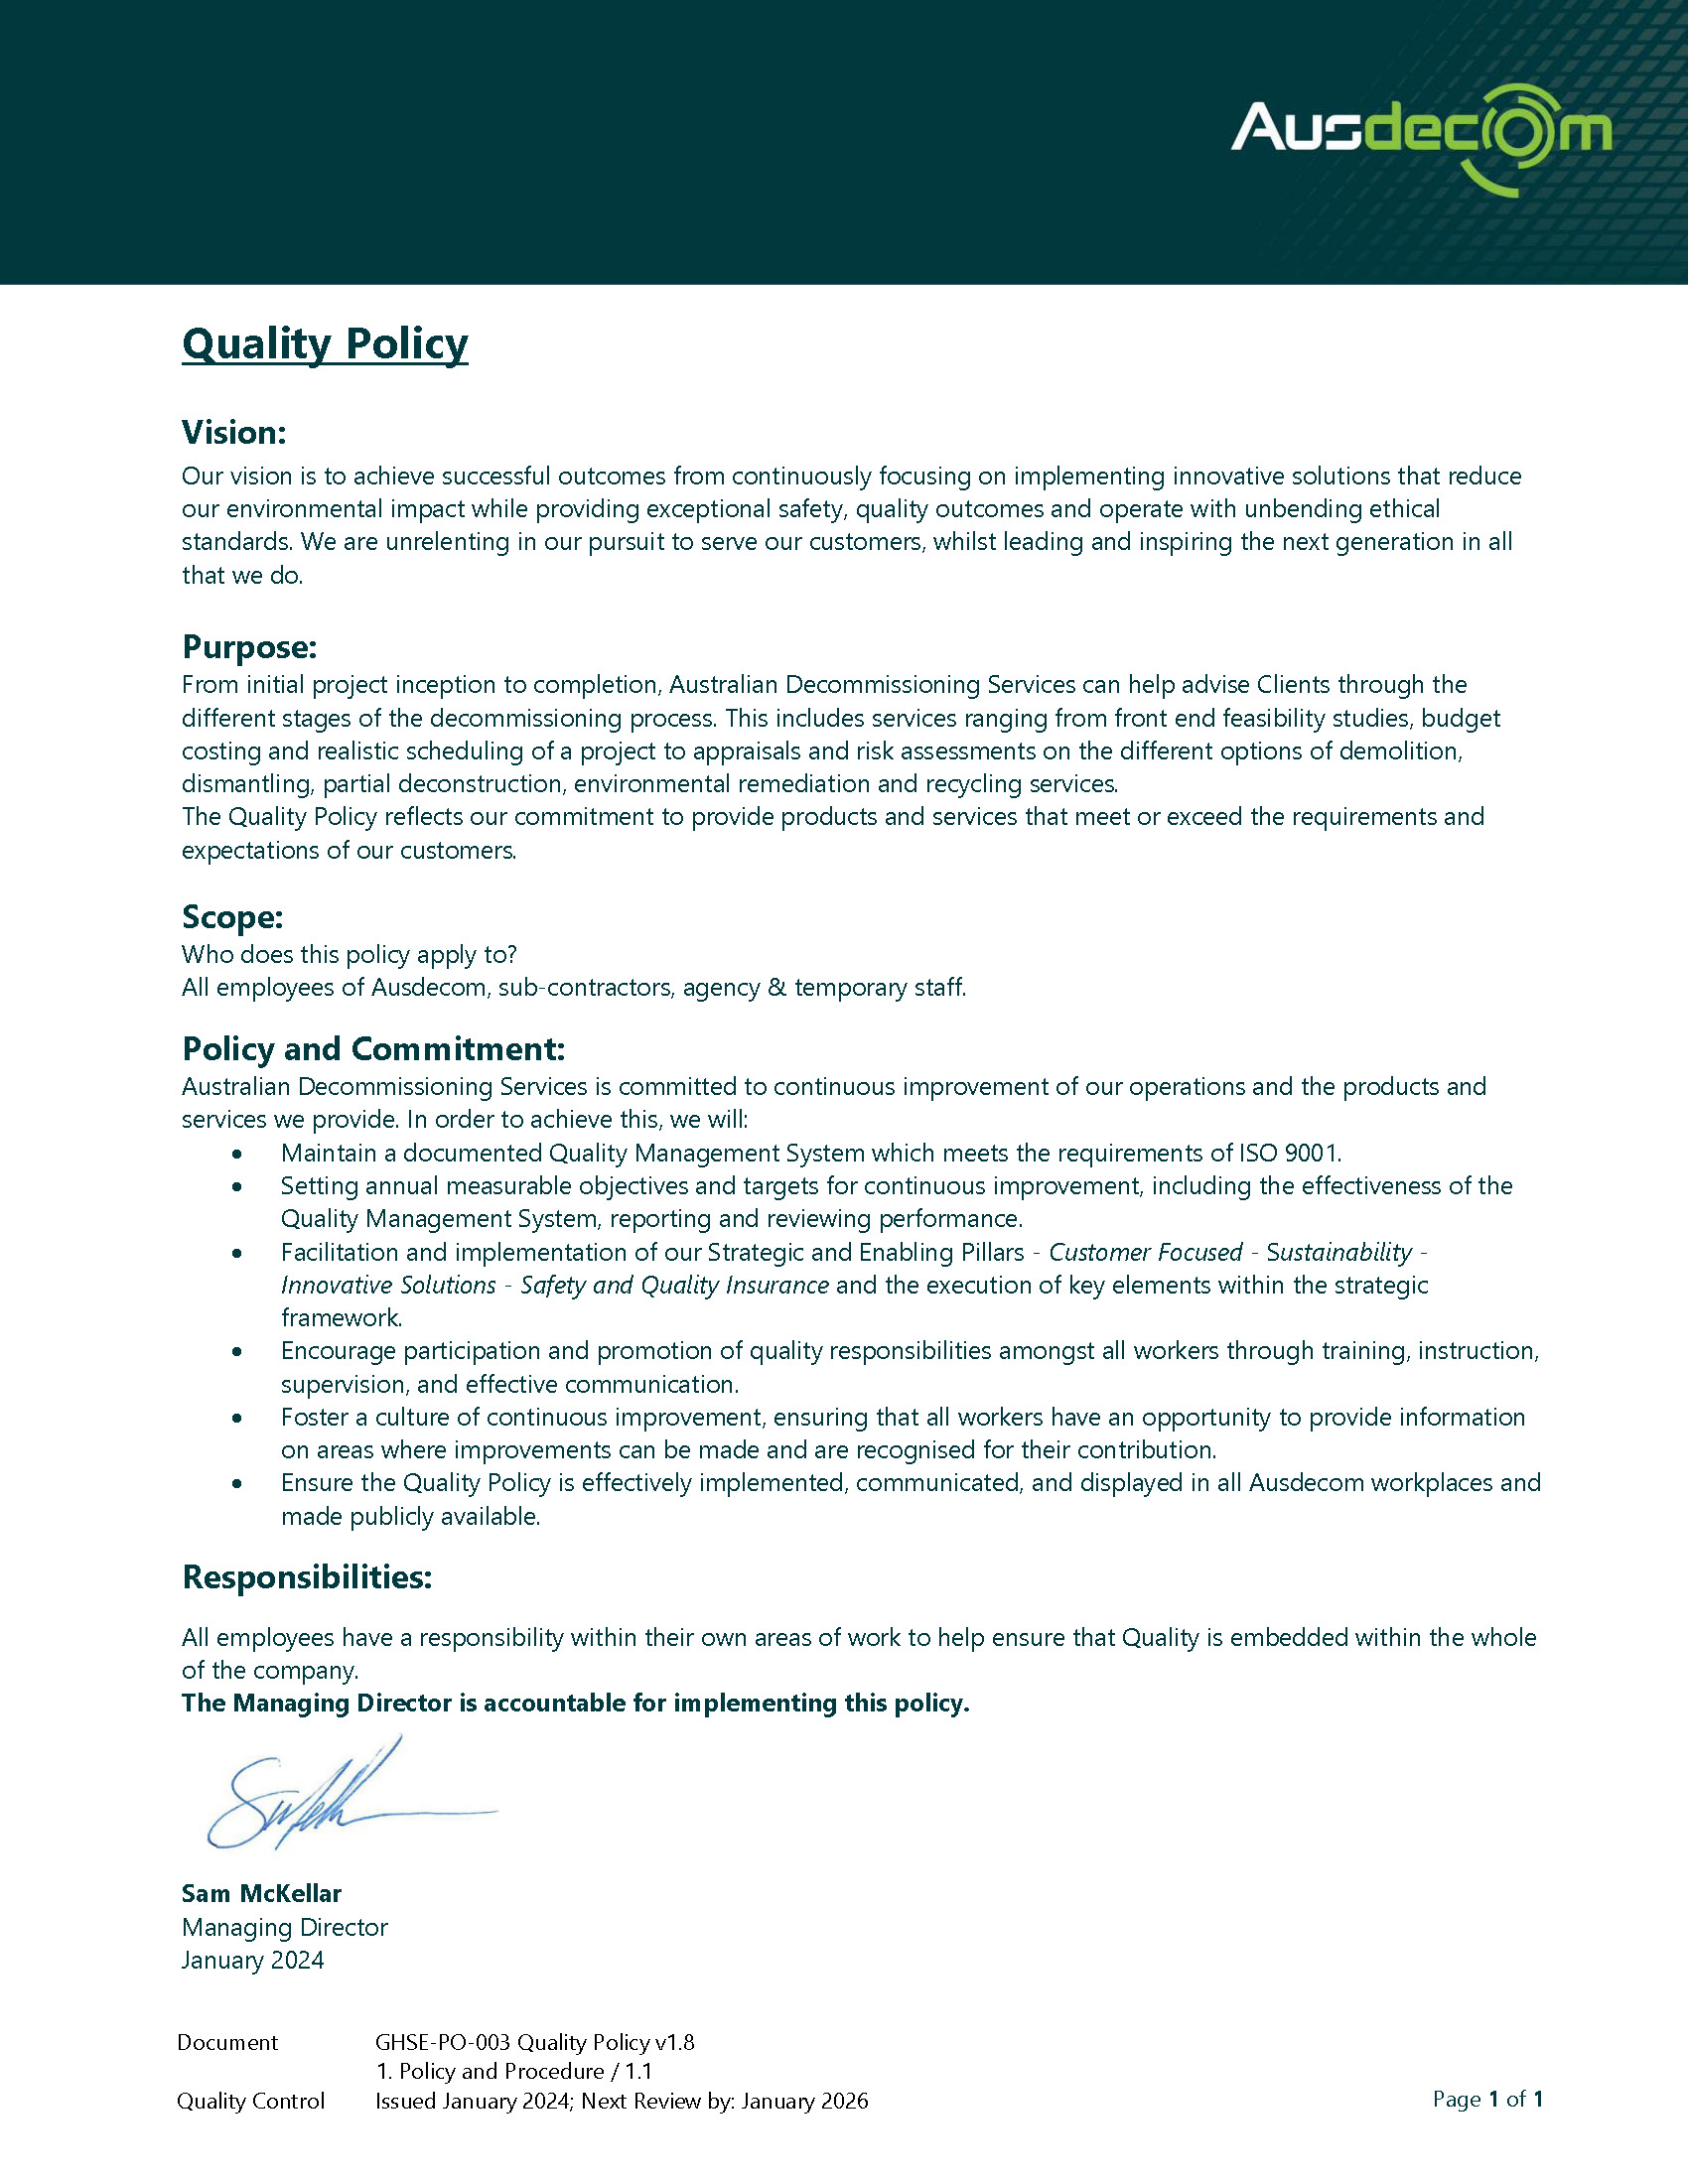 http://Quality%20Policy